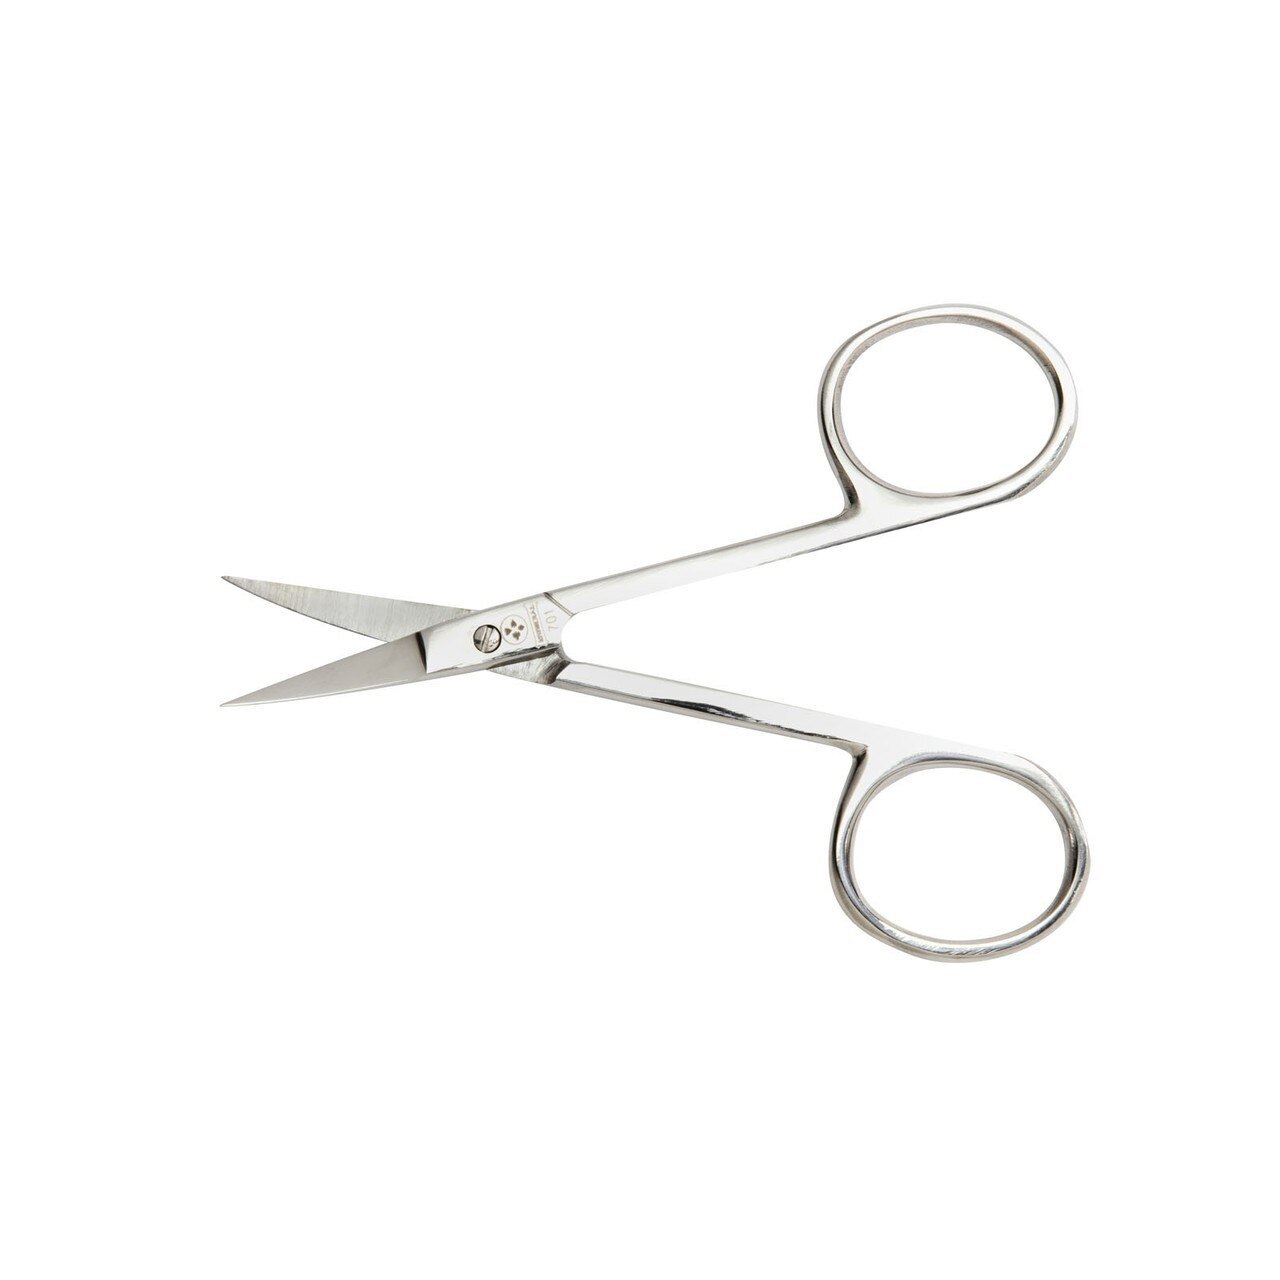 Mundial Curved Embroidery Scissors 3.5in Classic Forged